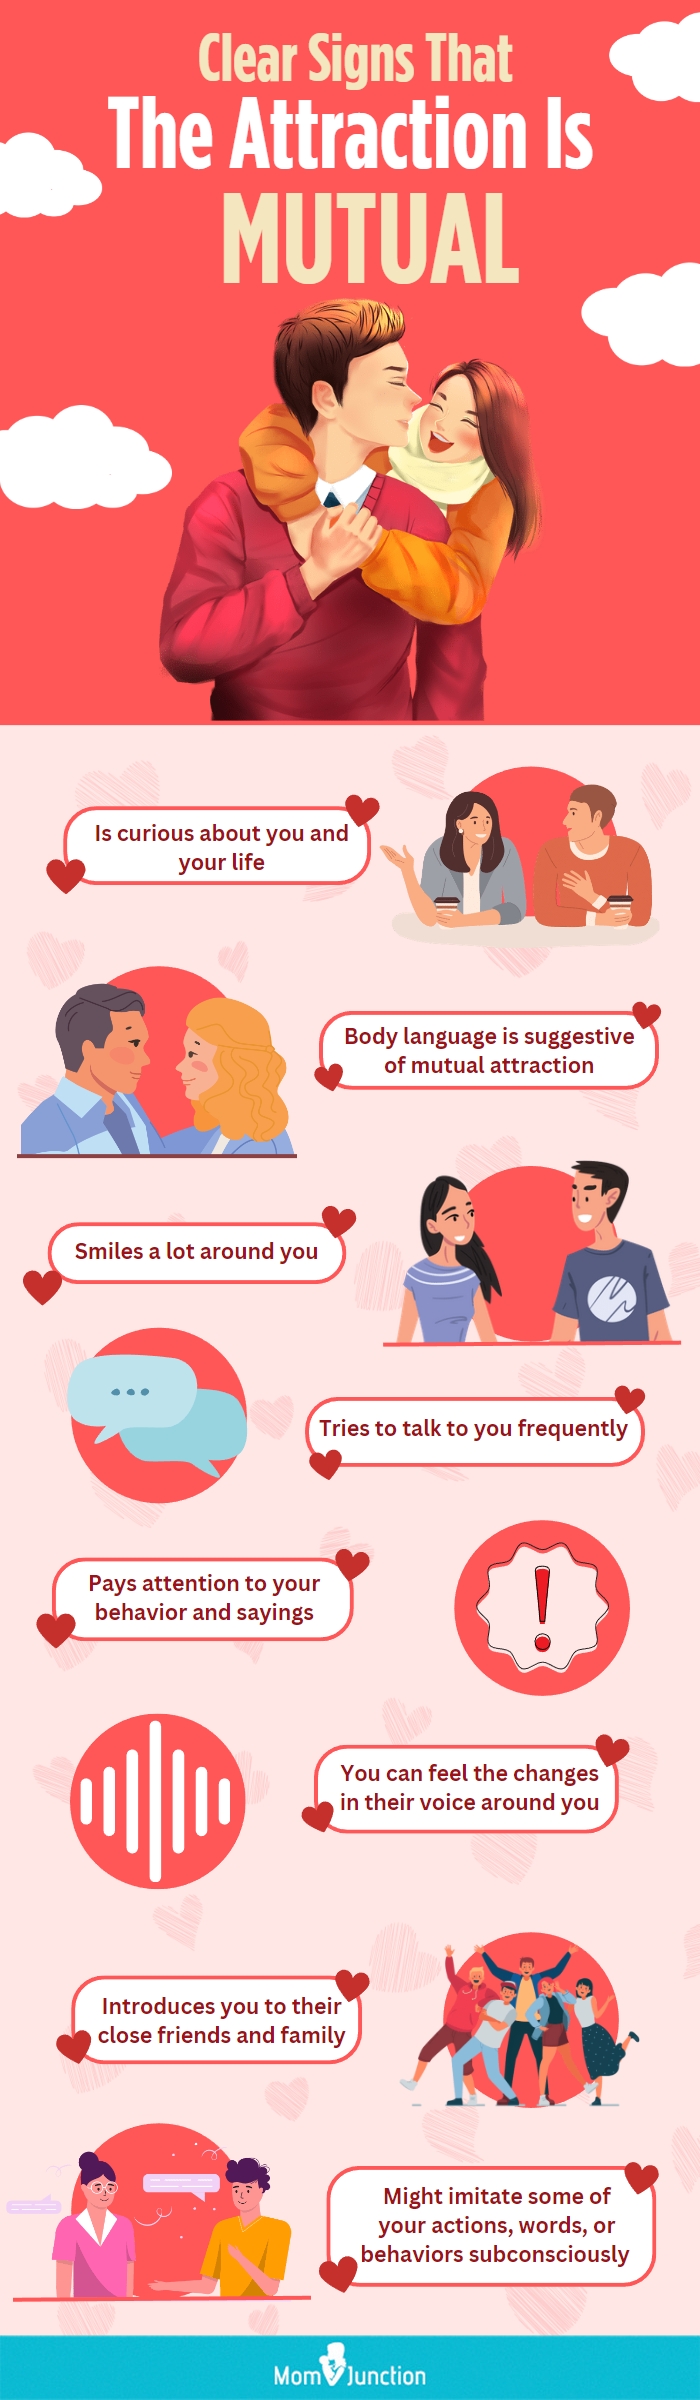 clear signs that the attraction is mutual (infographic)